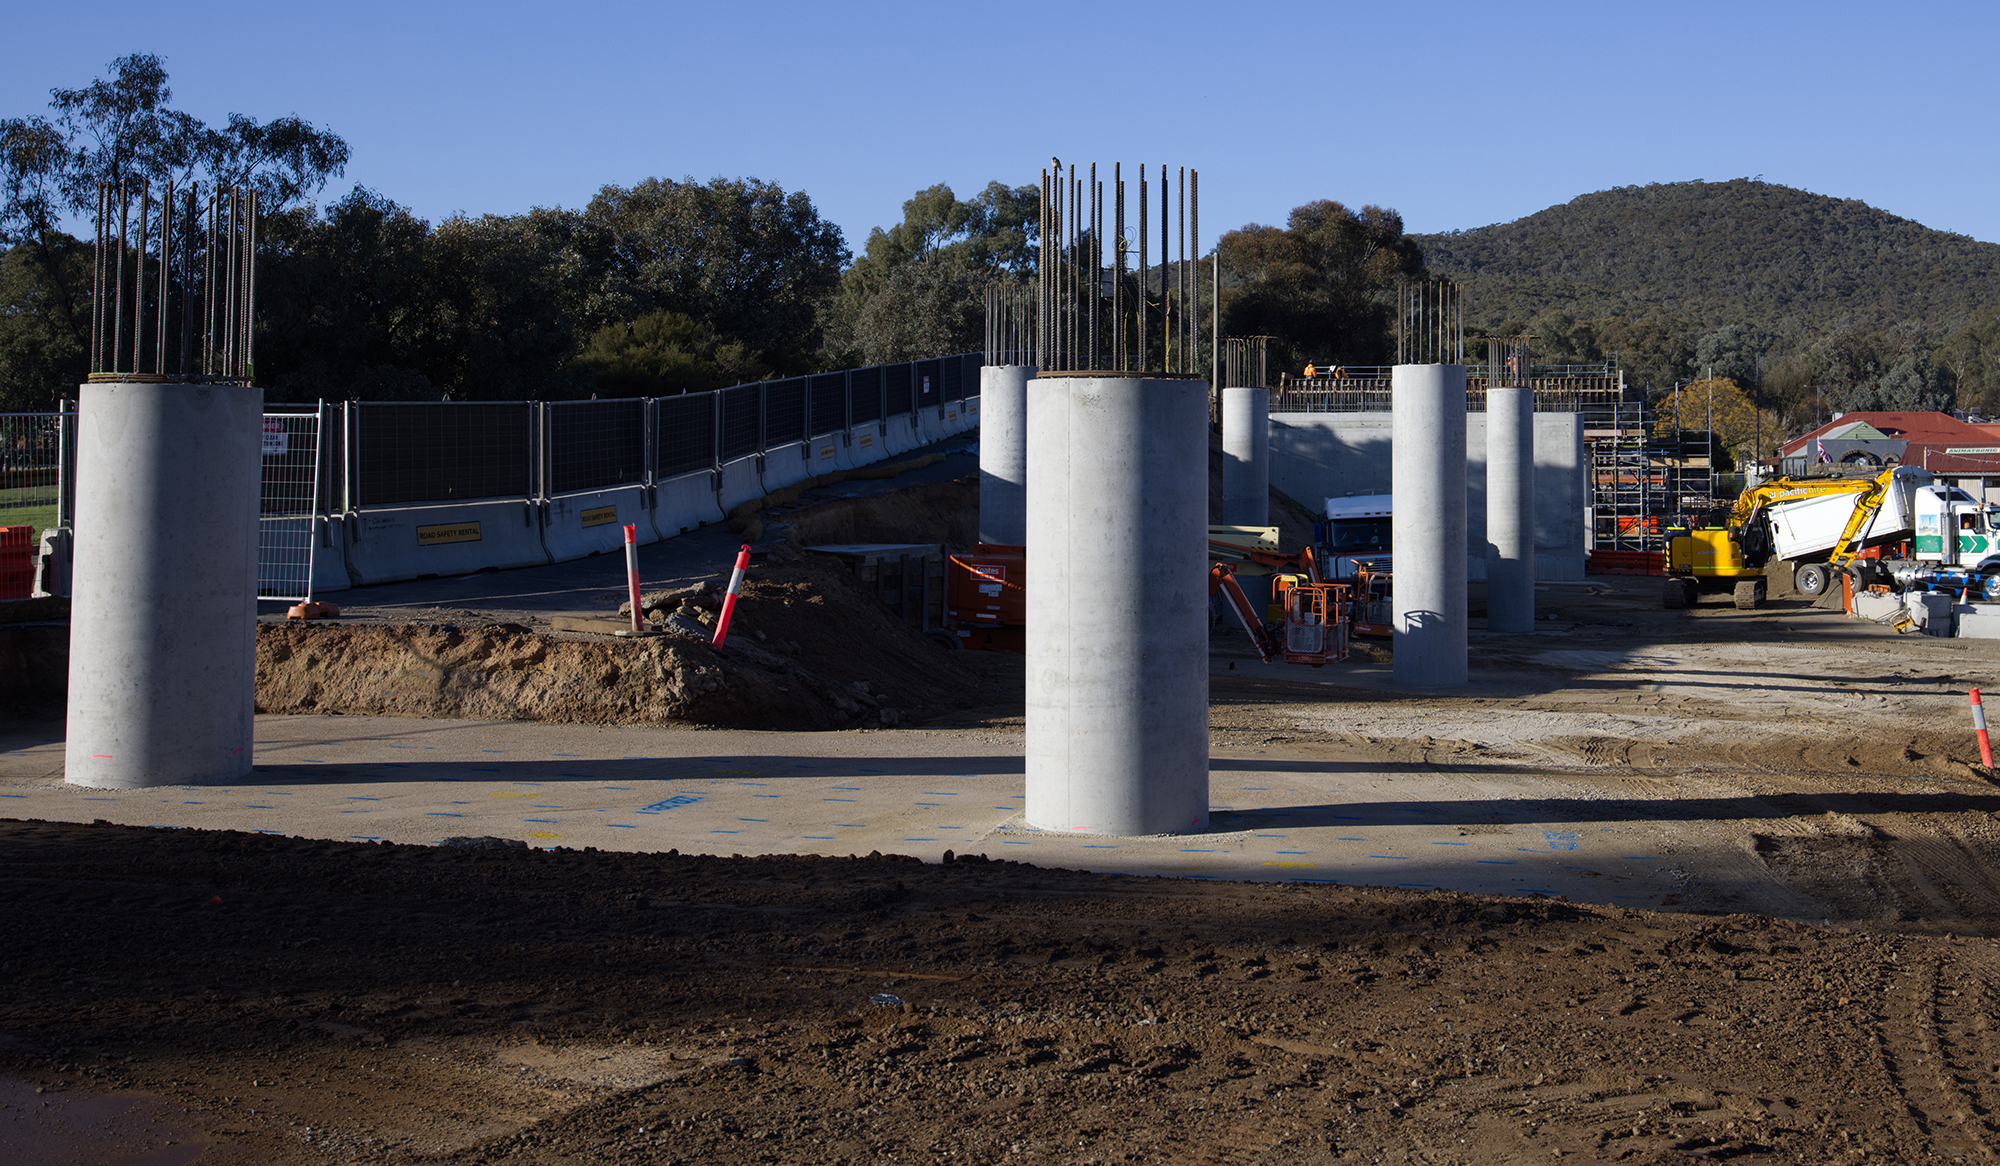 Columns are starting to take shape for the new Beaconsfield Parade bridge